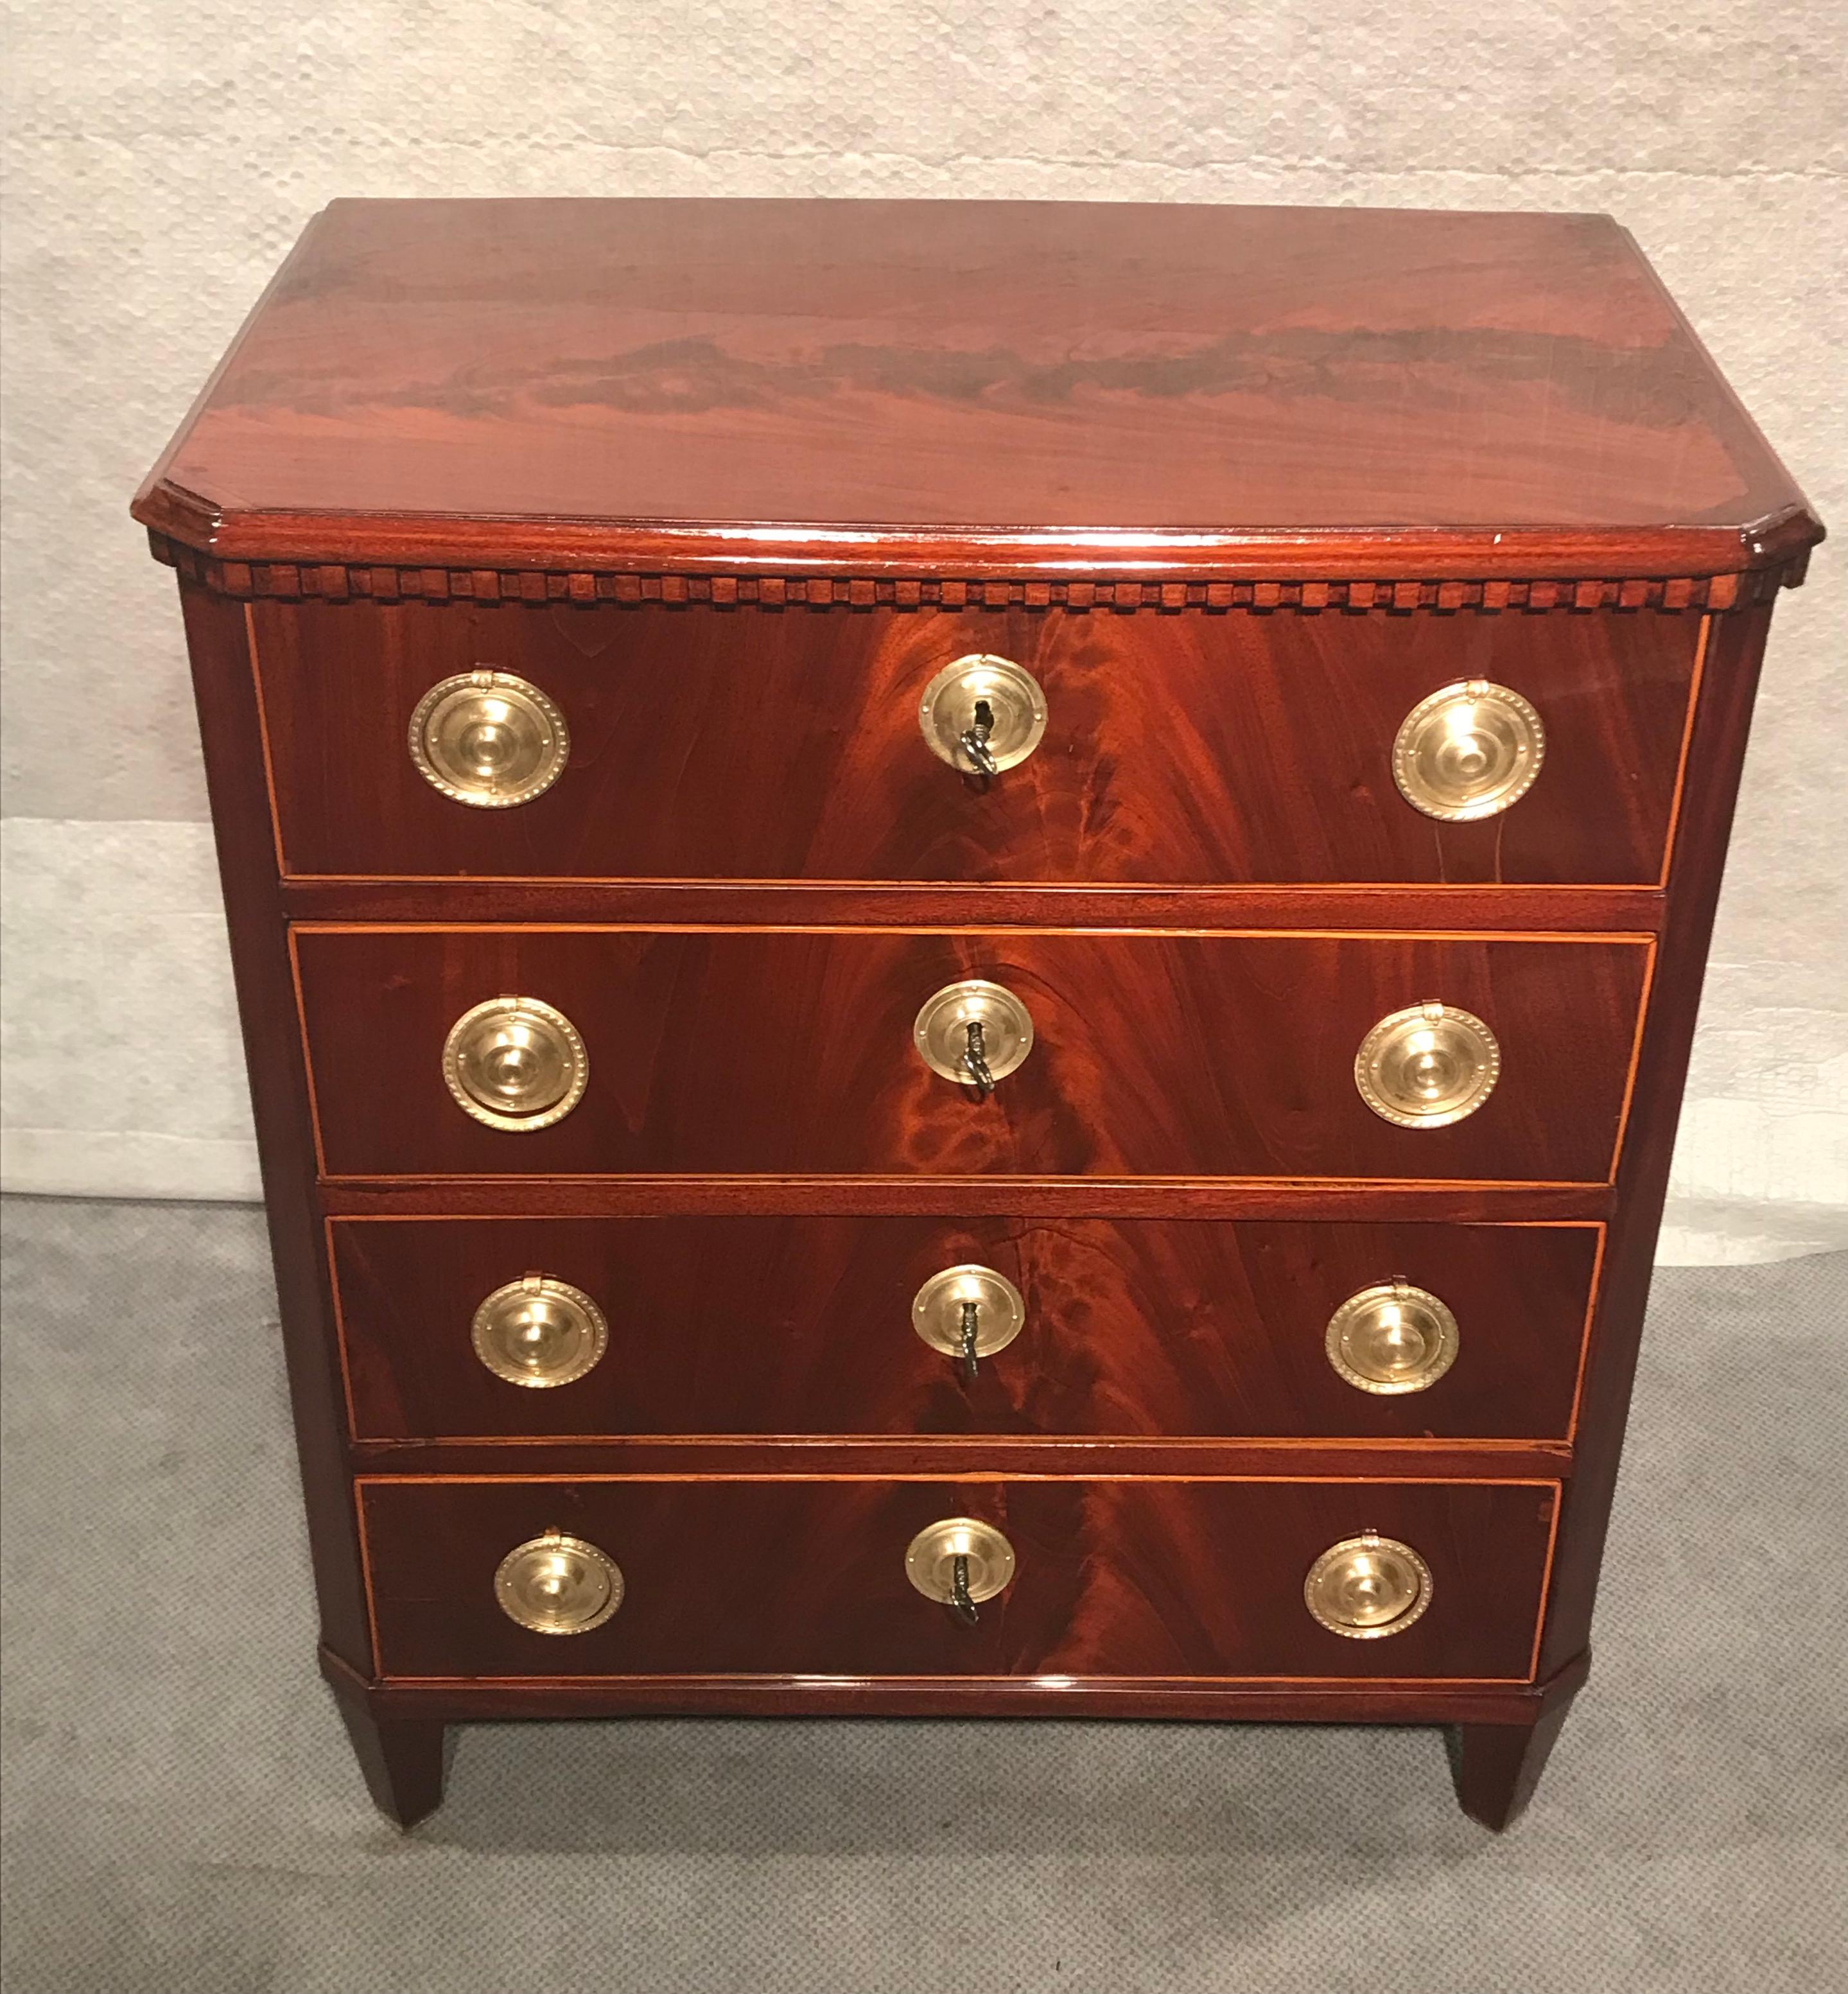 This neoclassical chest of drawers offers you a lot of storage space. The elegant chest of drawers dates back to around 1800 and comes from Northern Germany. It has a beautiful mahogany veneer and and 4 drawers. The top has a pretty dentil panel